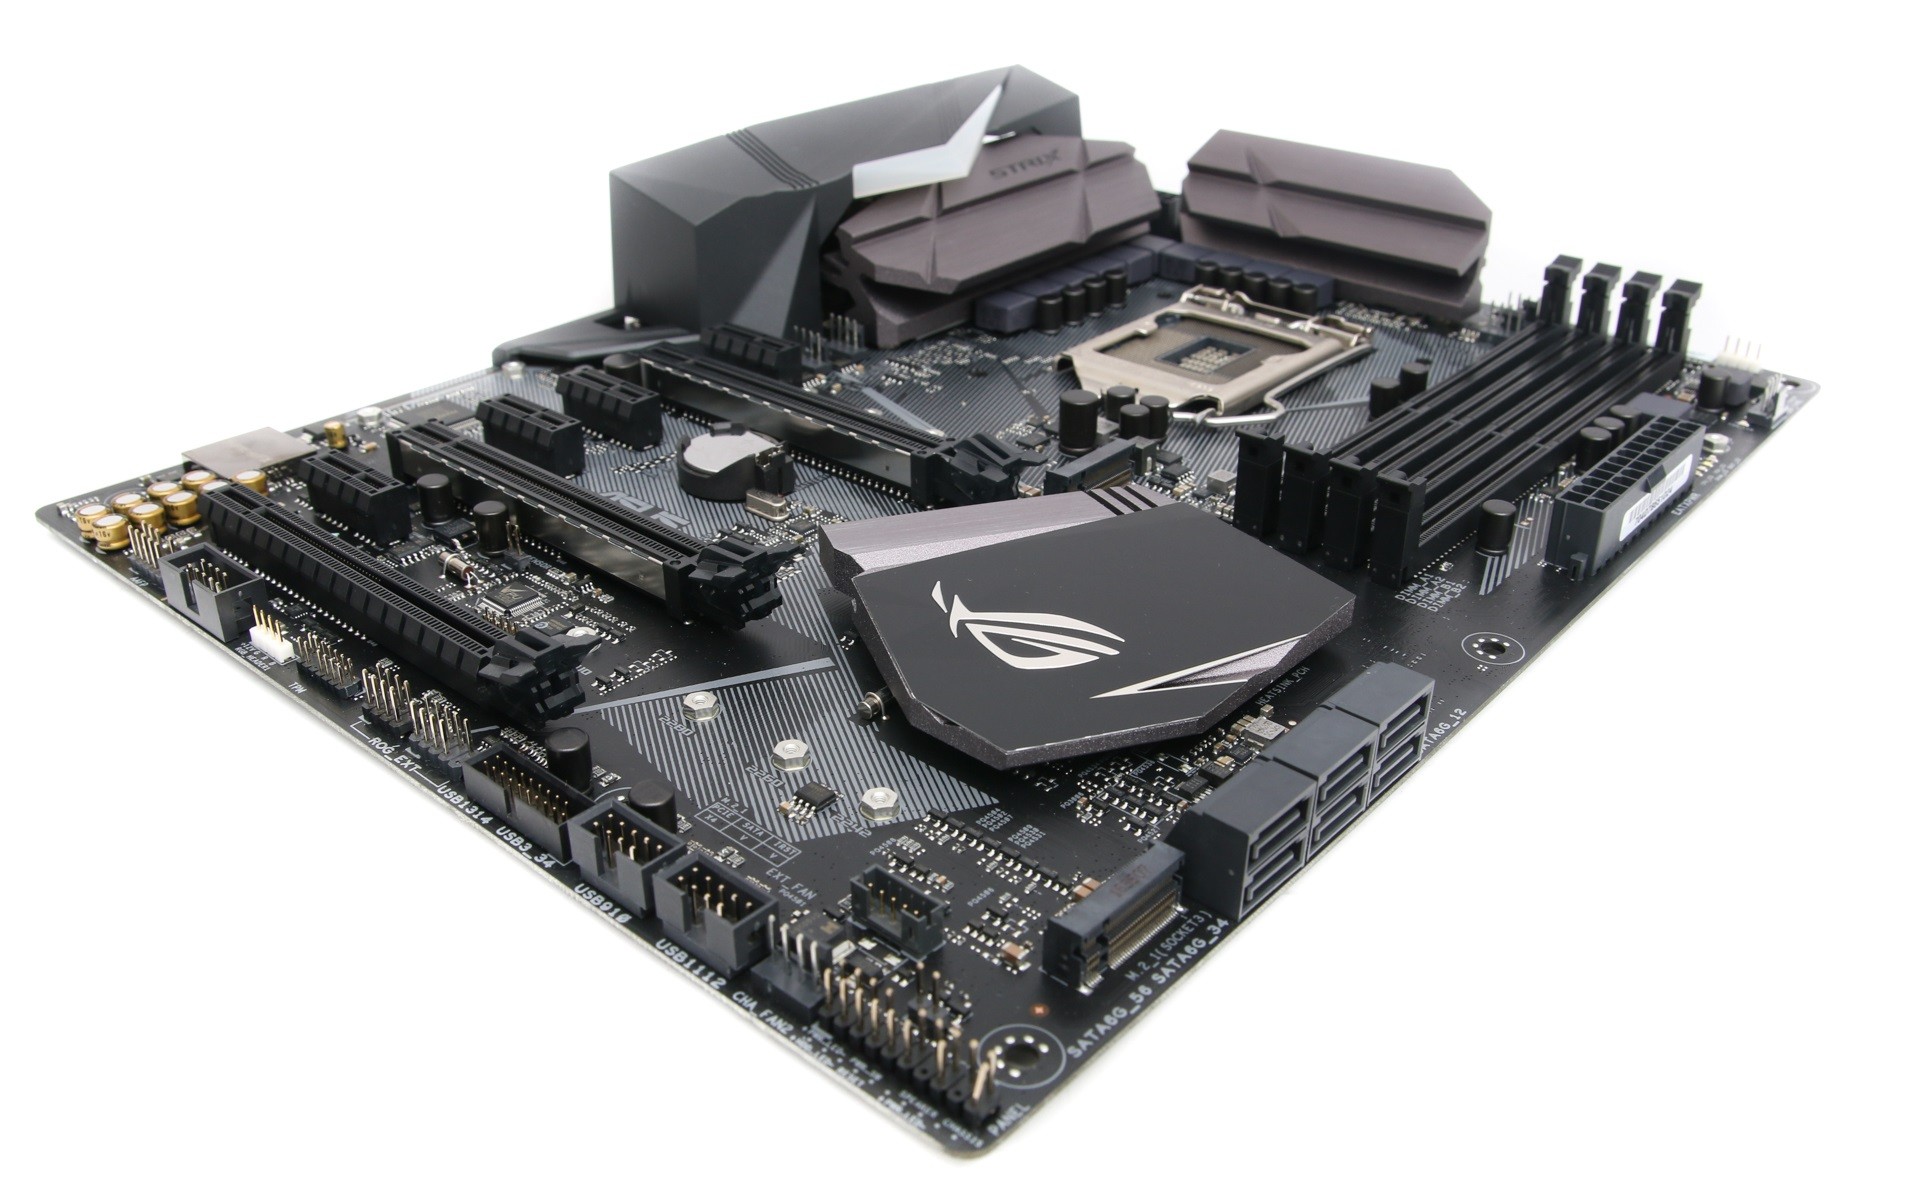 Download Drivers for ASUS’s Republic of Gamers Strix Z270F Gaming